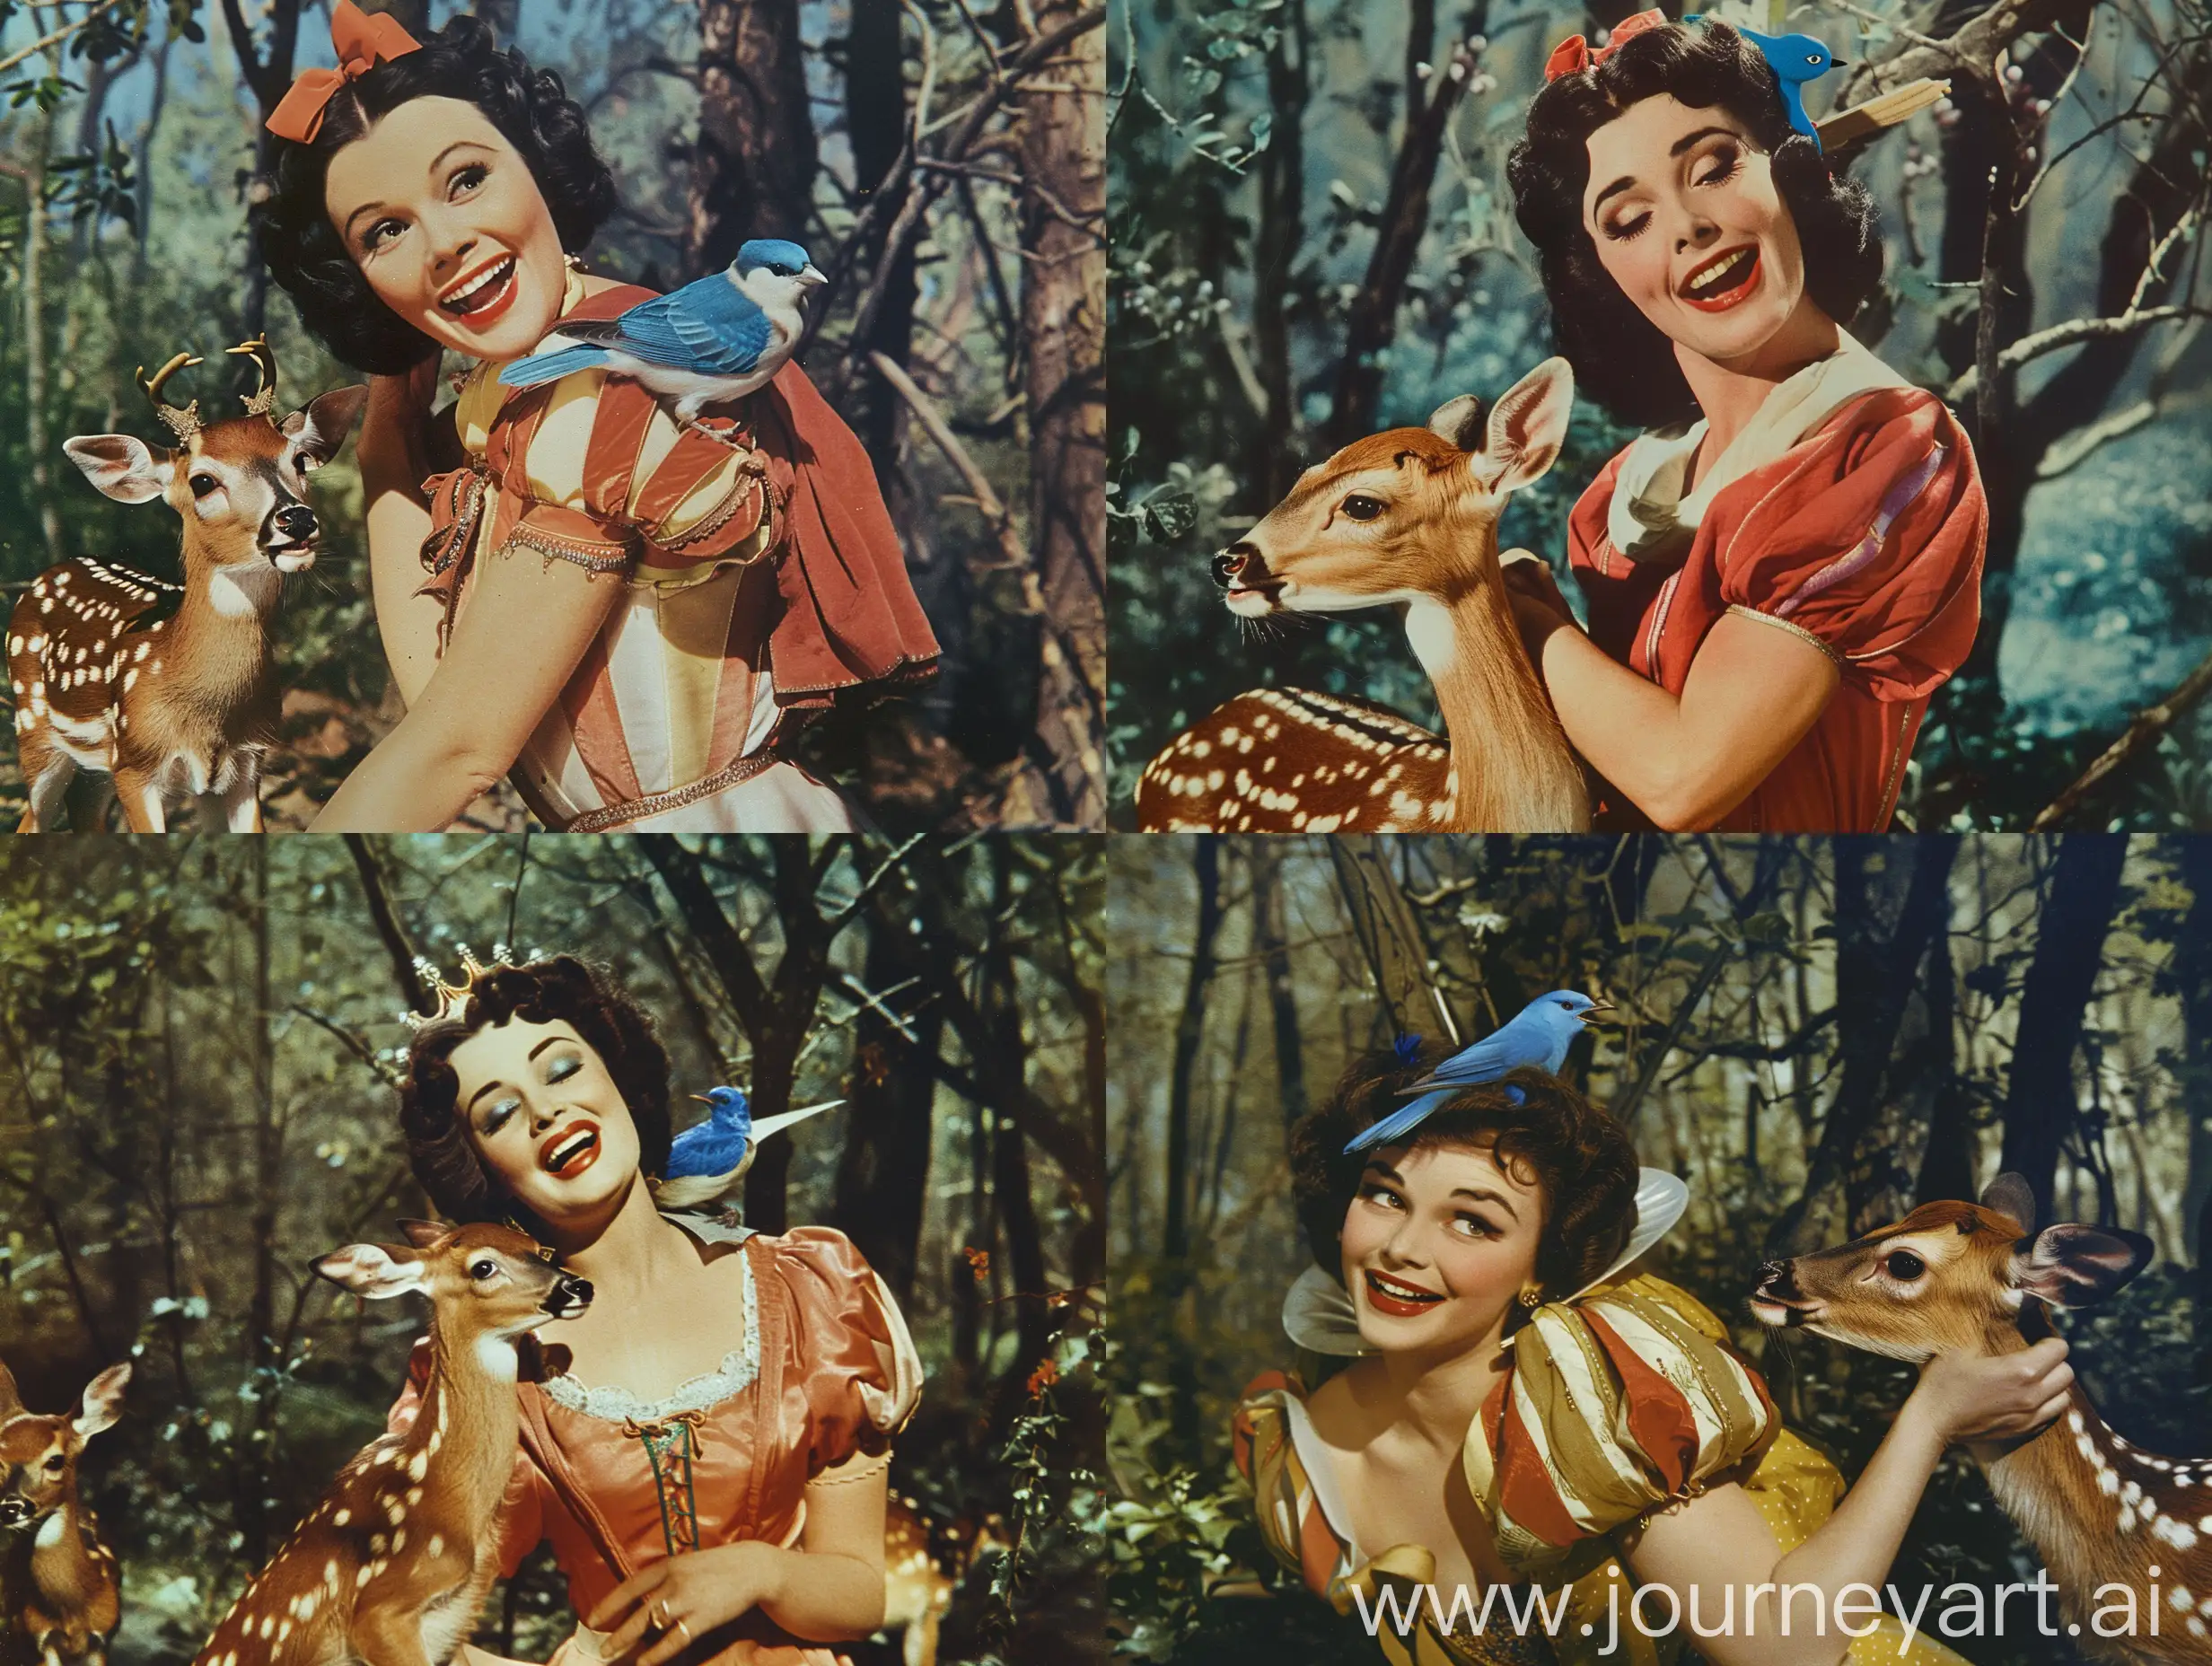 A happy Elizabeth Taylor as Snow White, singing and dancing in the forest, a blue sparrow perched on her shoulder and a baby deer standing next to her. 1950s Super Panavision 70, color picture, vintage quality